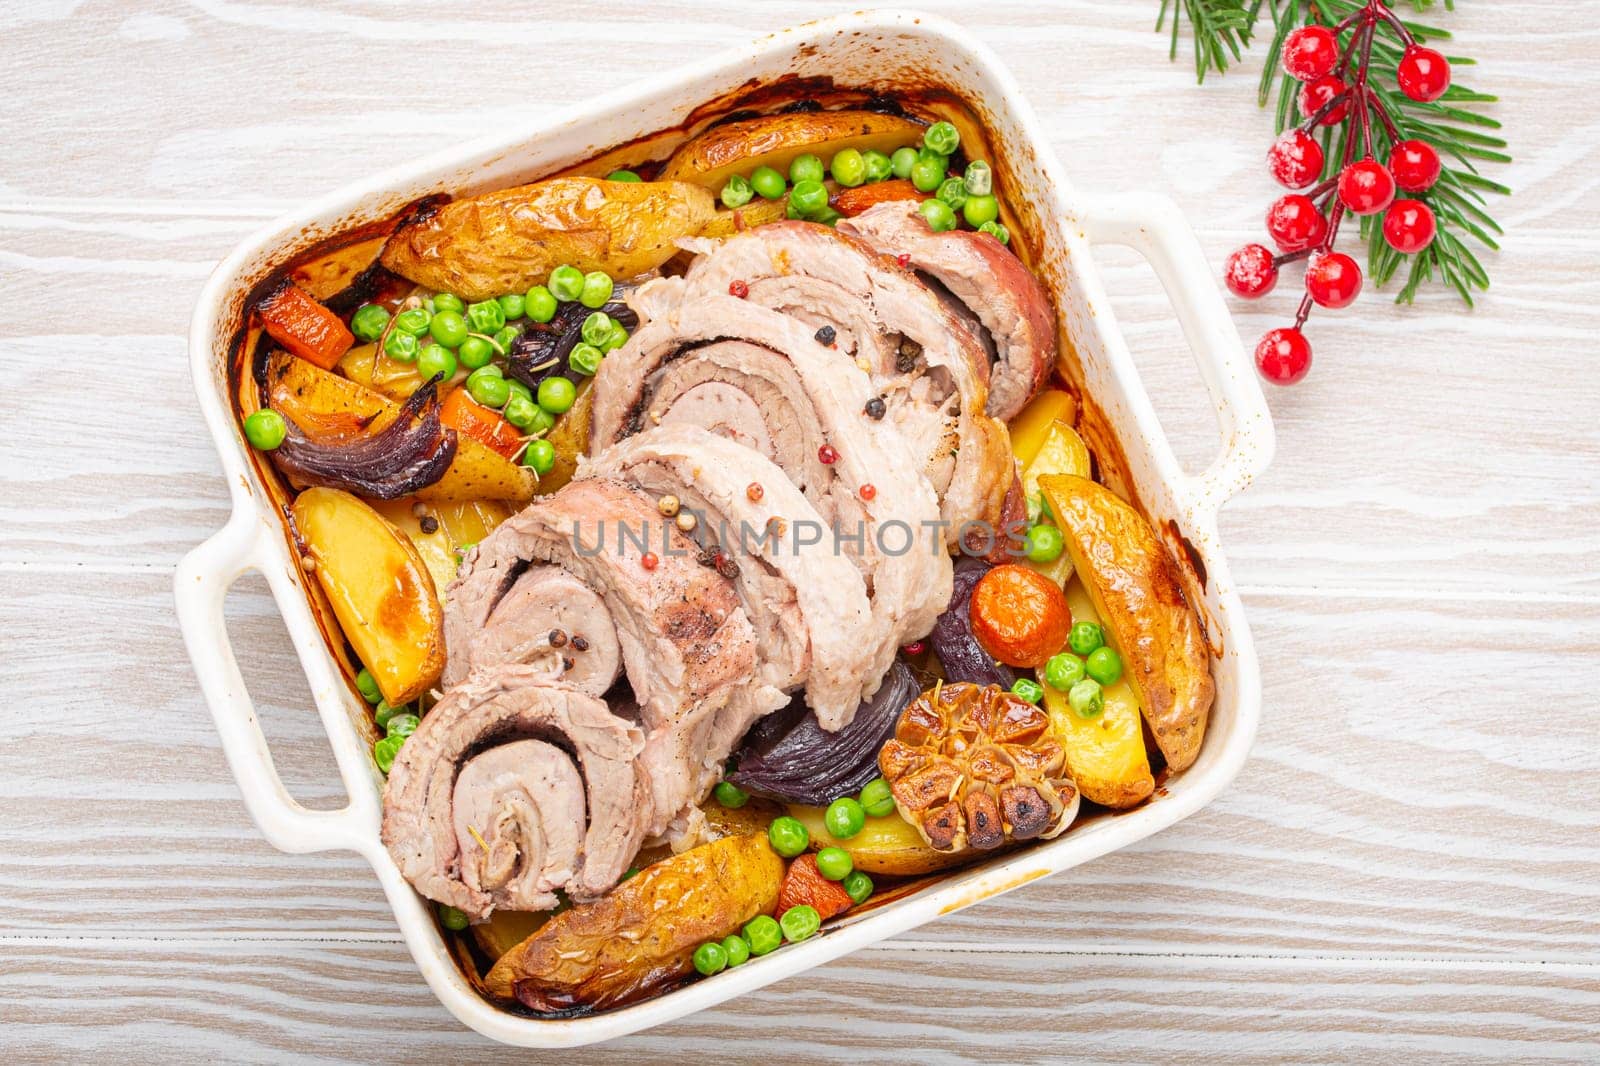 Festive Christmas rolled sliced pork roasted in white casserole dish with potatoes, vegetables and herbs on rustic white wooden background top view. Baked pork roll with vegetables for Xmas dinner by its_al_dente